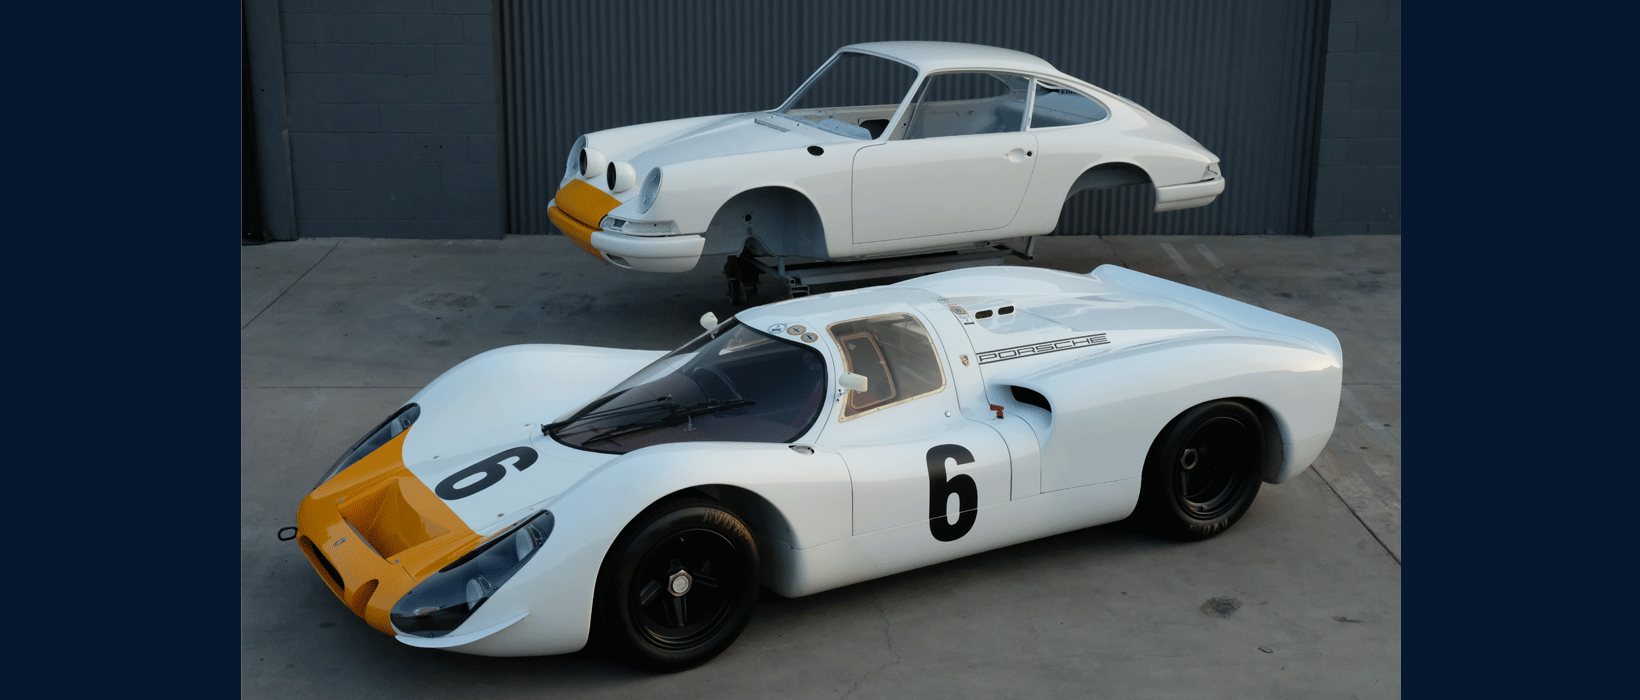 The Emory Outlaw 911K is lifted behind the car serving as its design inspiration, the Porsche 908.